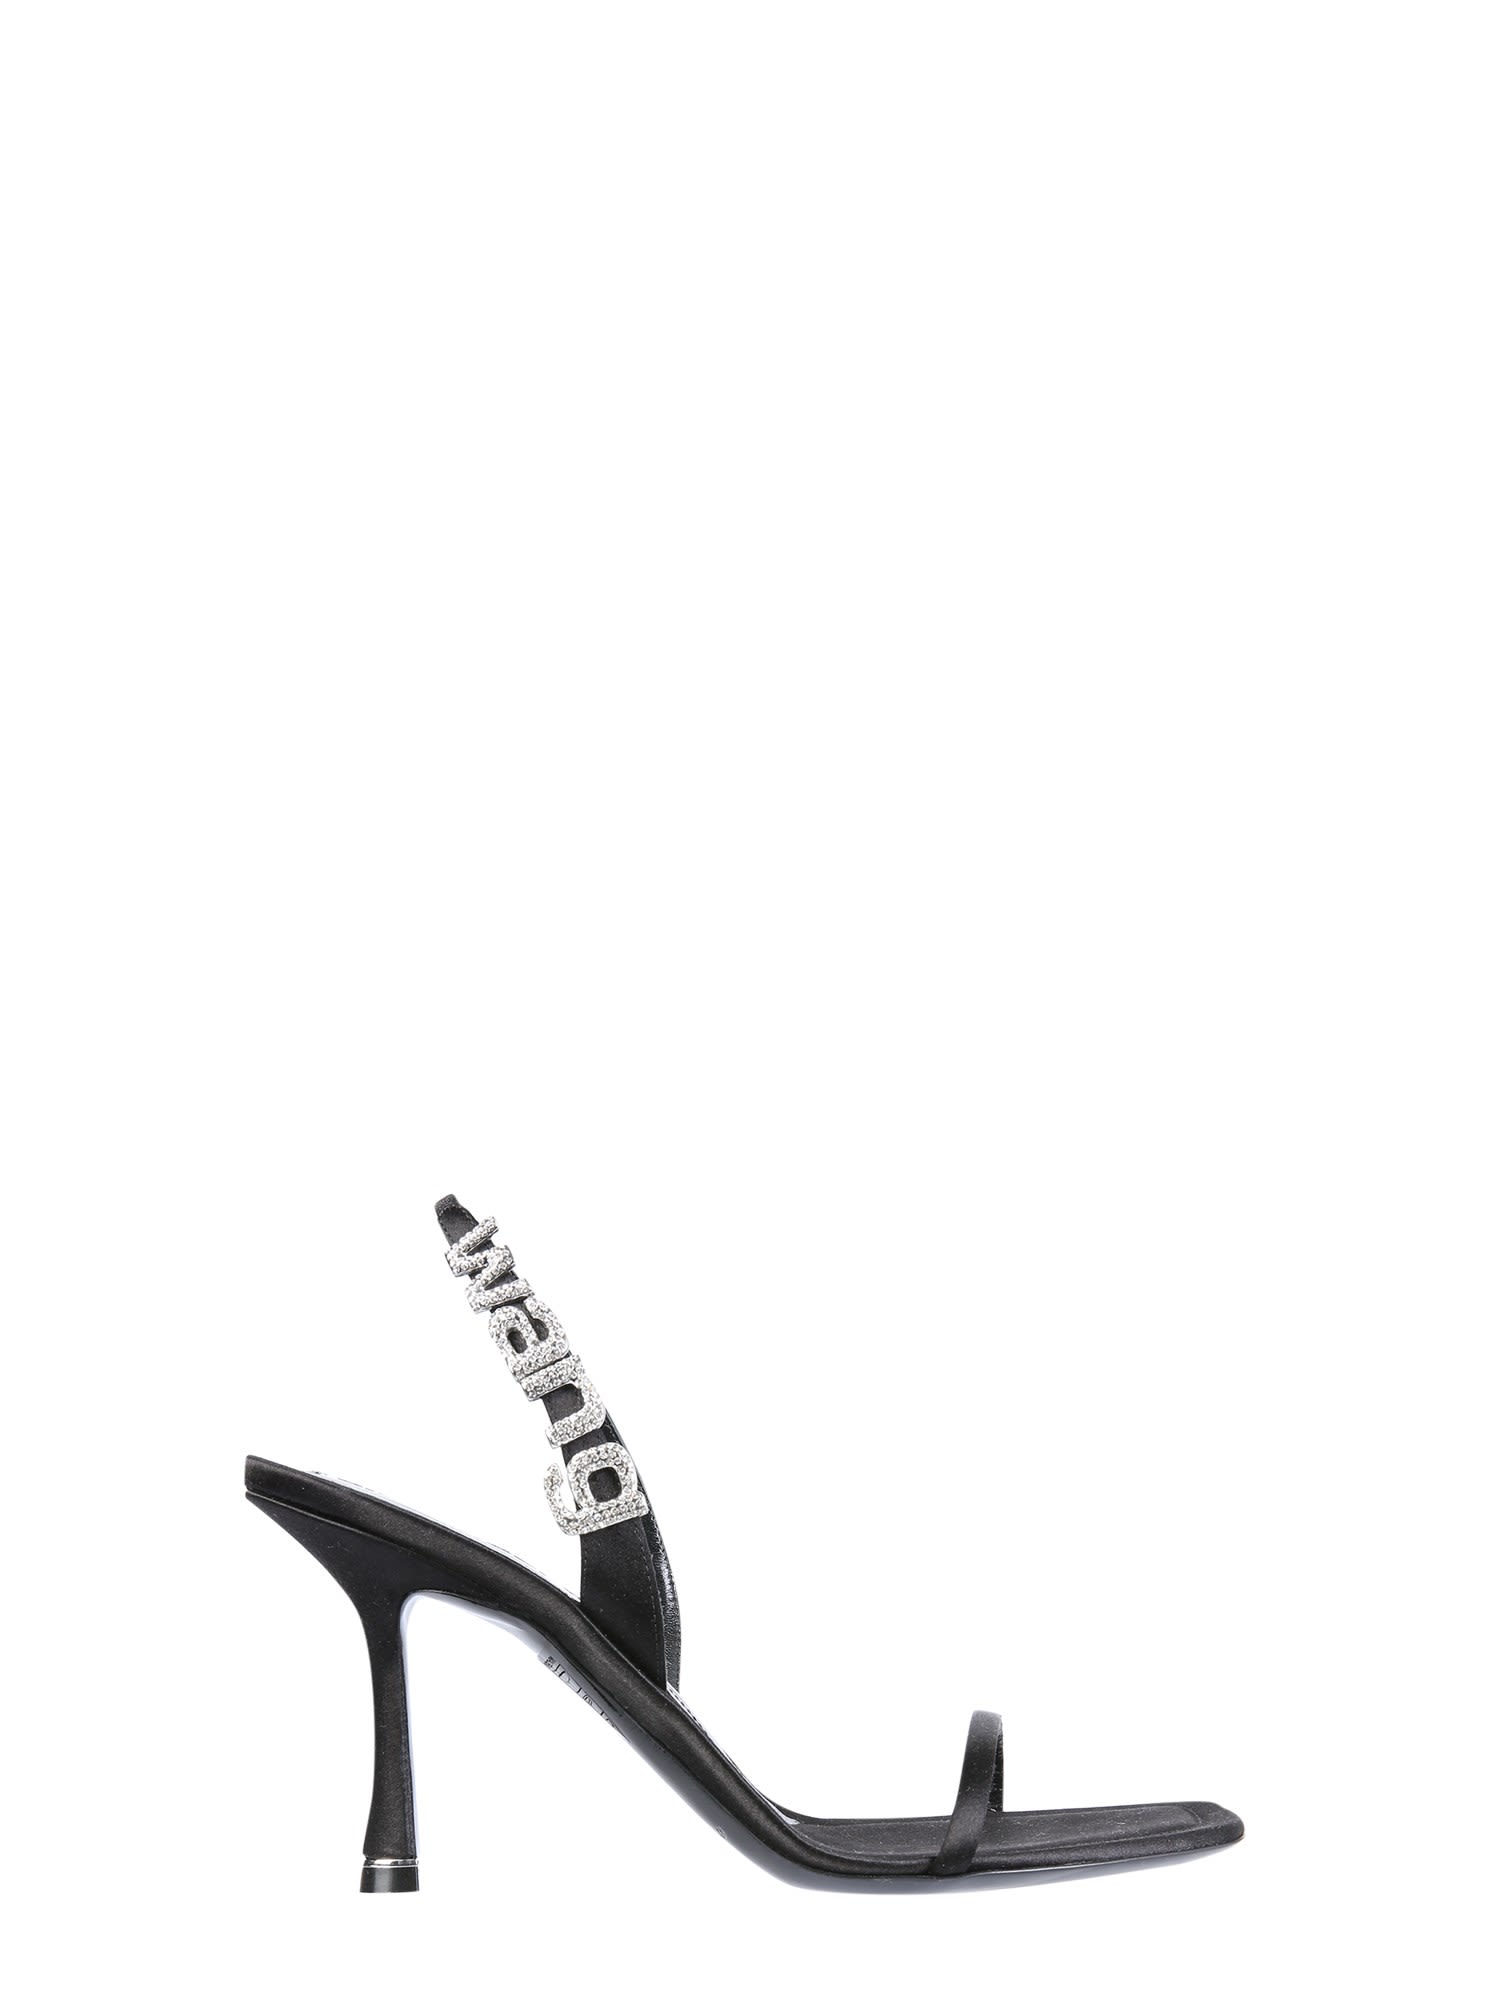 Buy Alexander Wang Ivy Sandals online, shop Alexander Wang shoes with free shipping